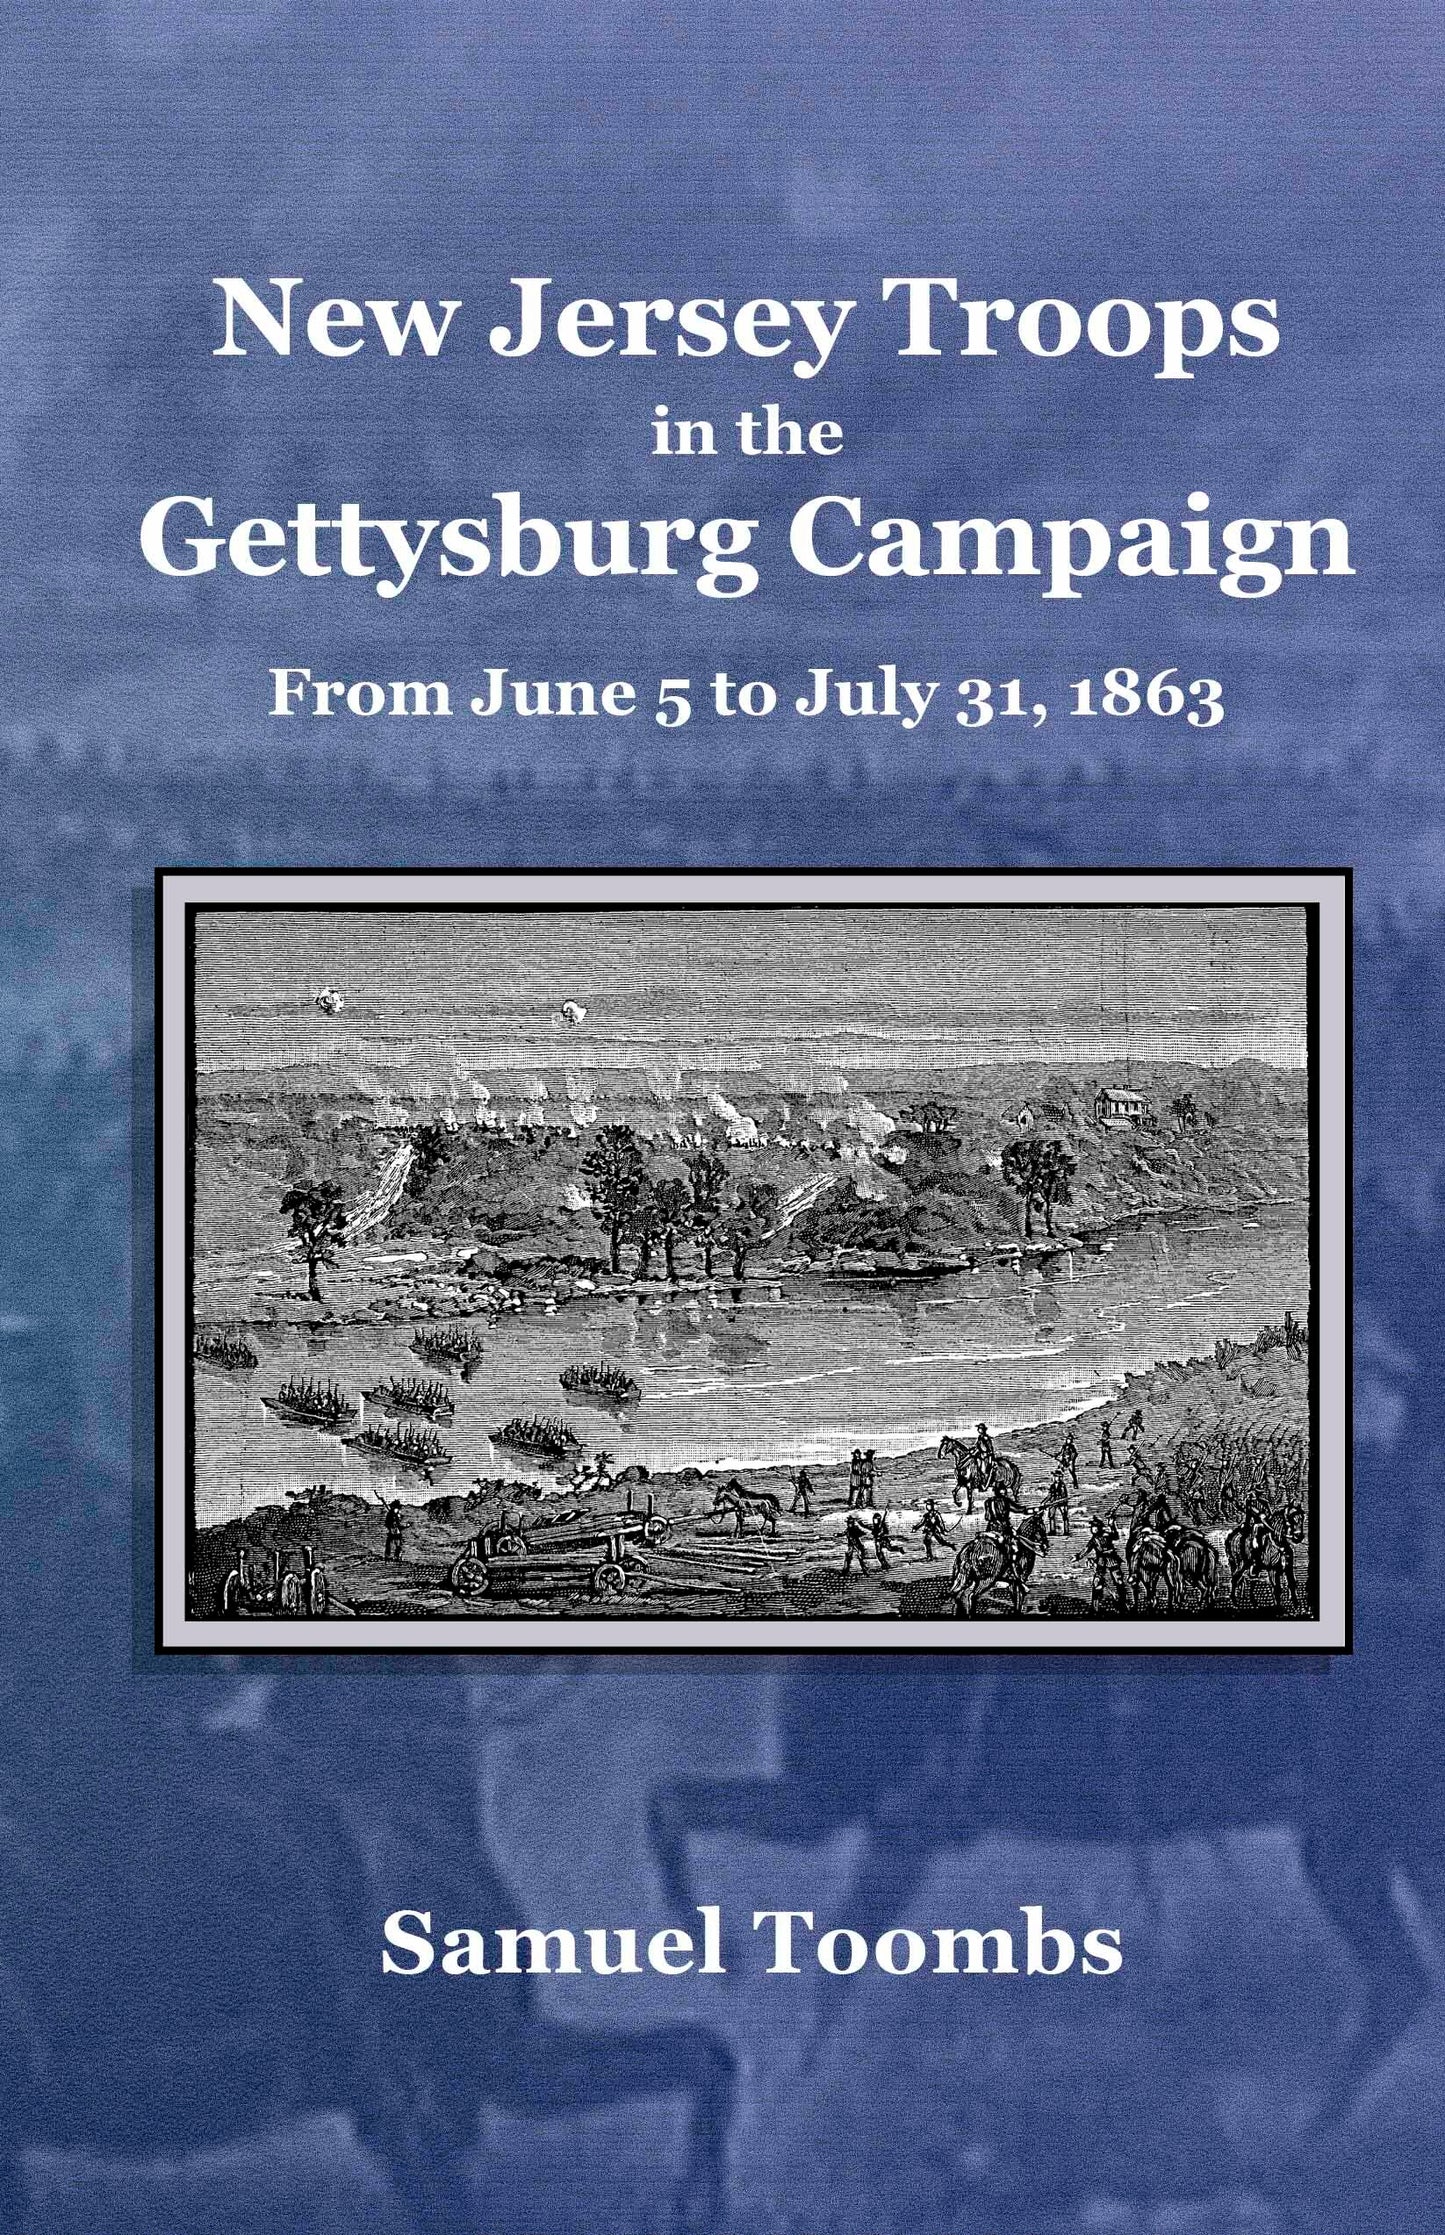 New Jersey Troops in the Gettysburg Campaign